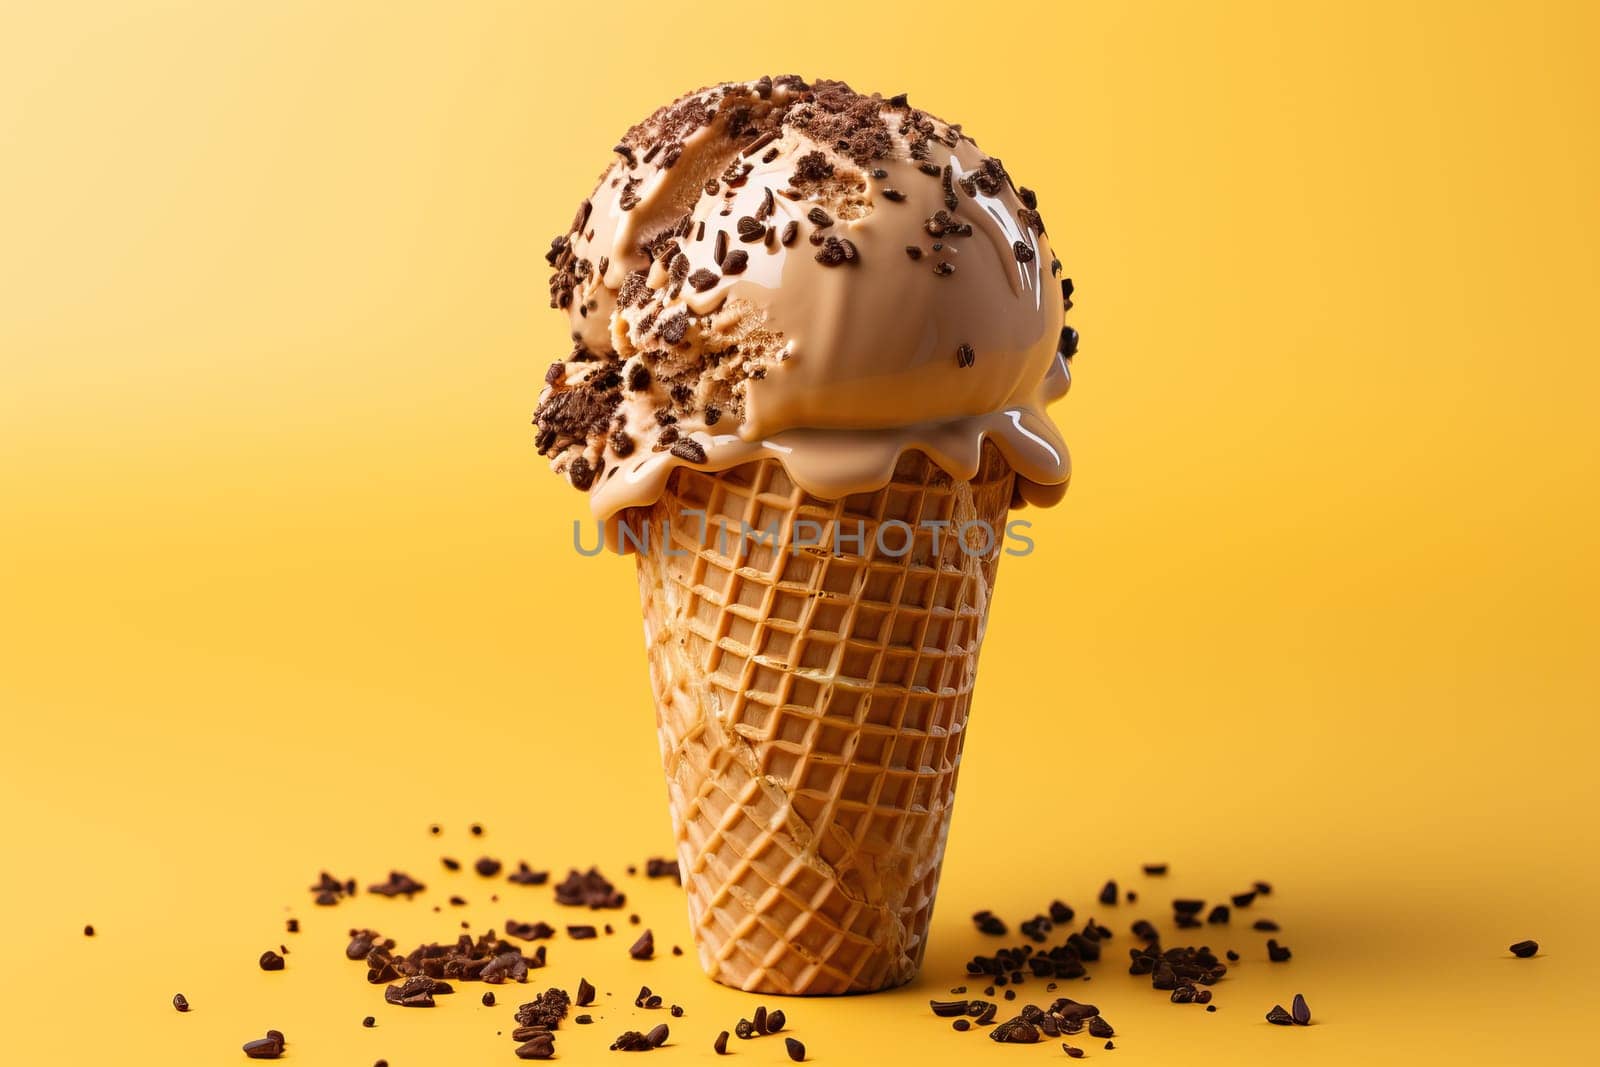 A cone of chocolate ice cream on a yellow background sprinkled with chocolate close-up.